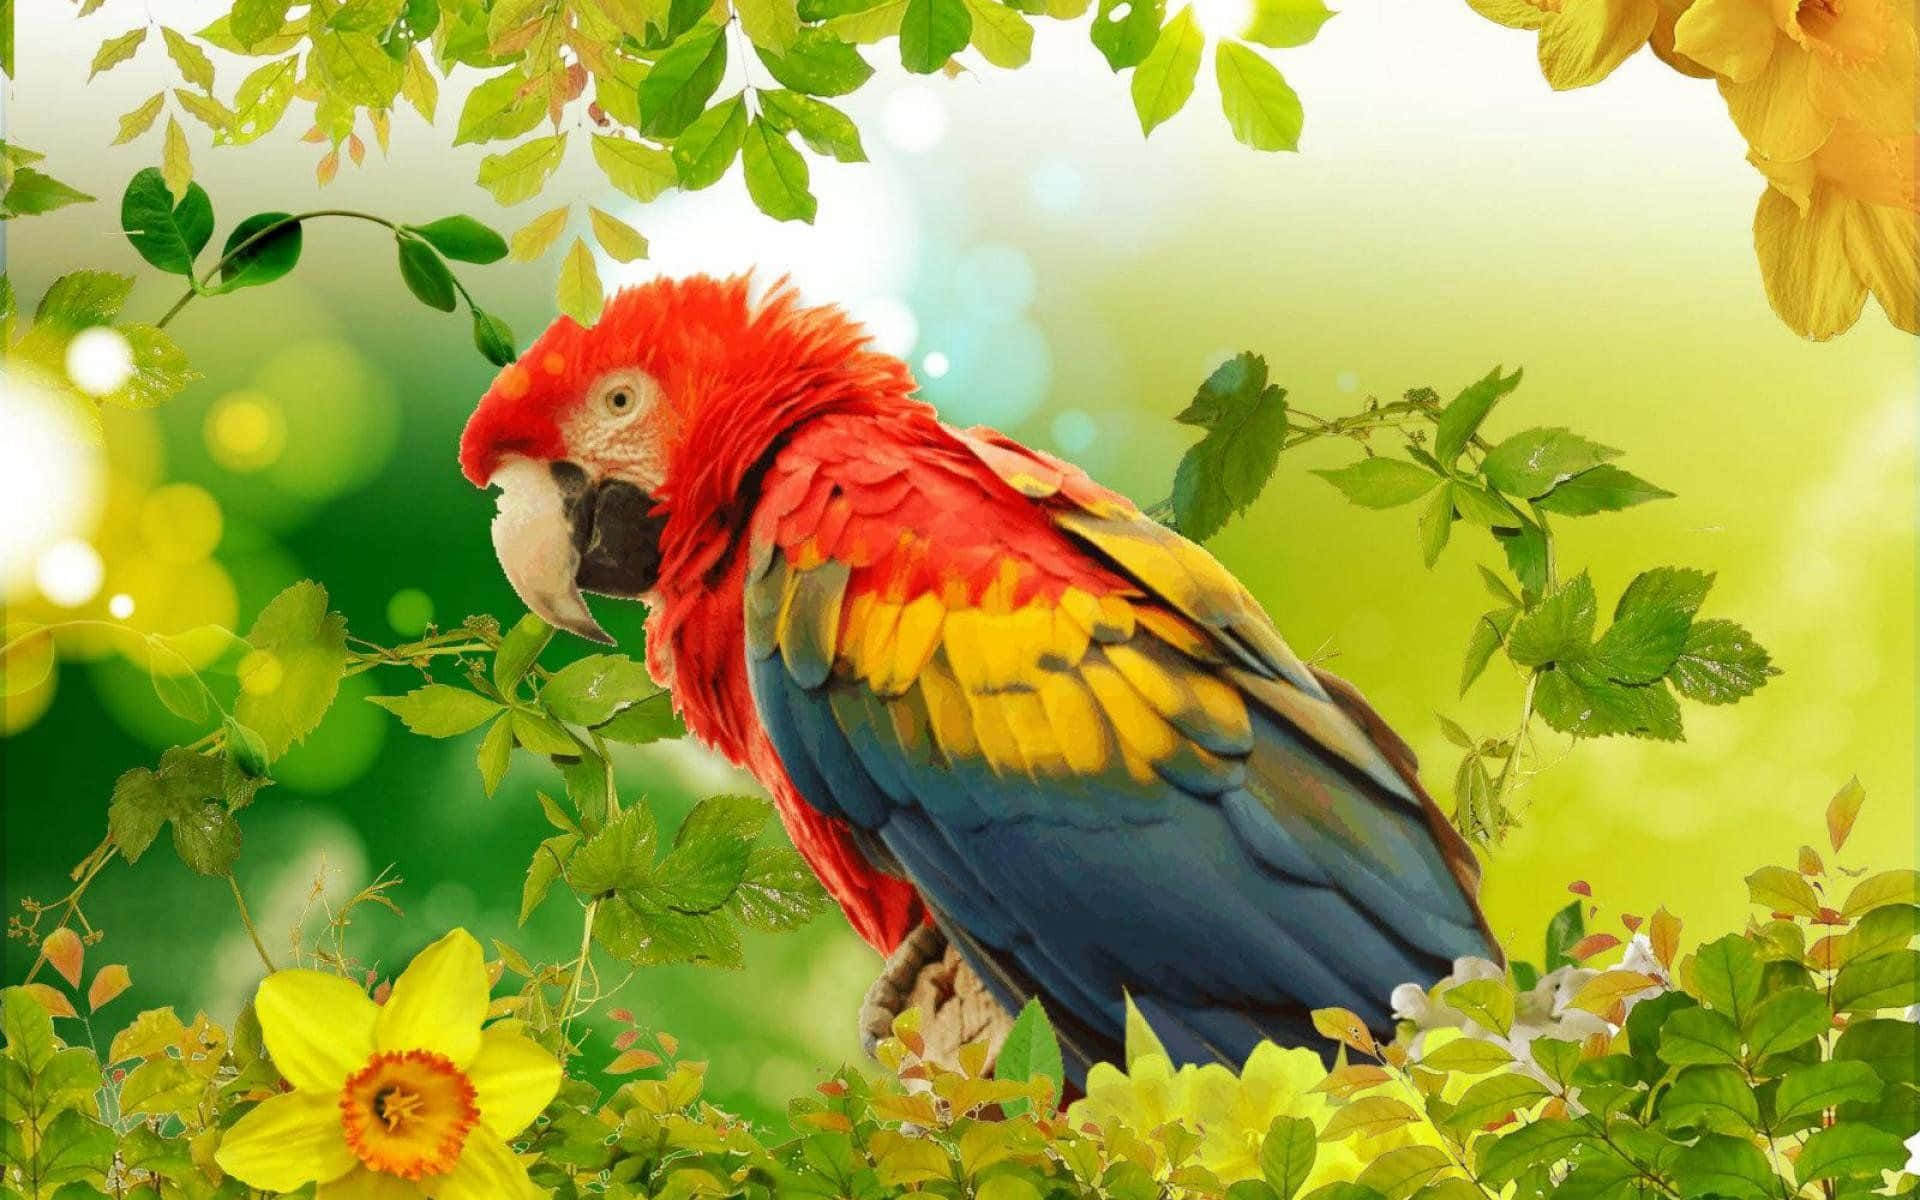 A beautiful parrot resting on a branch